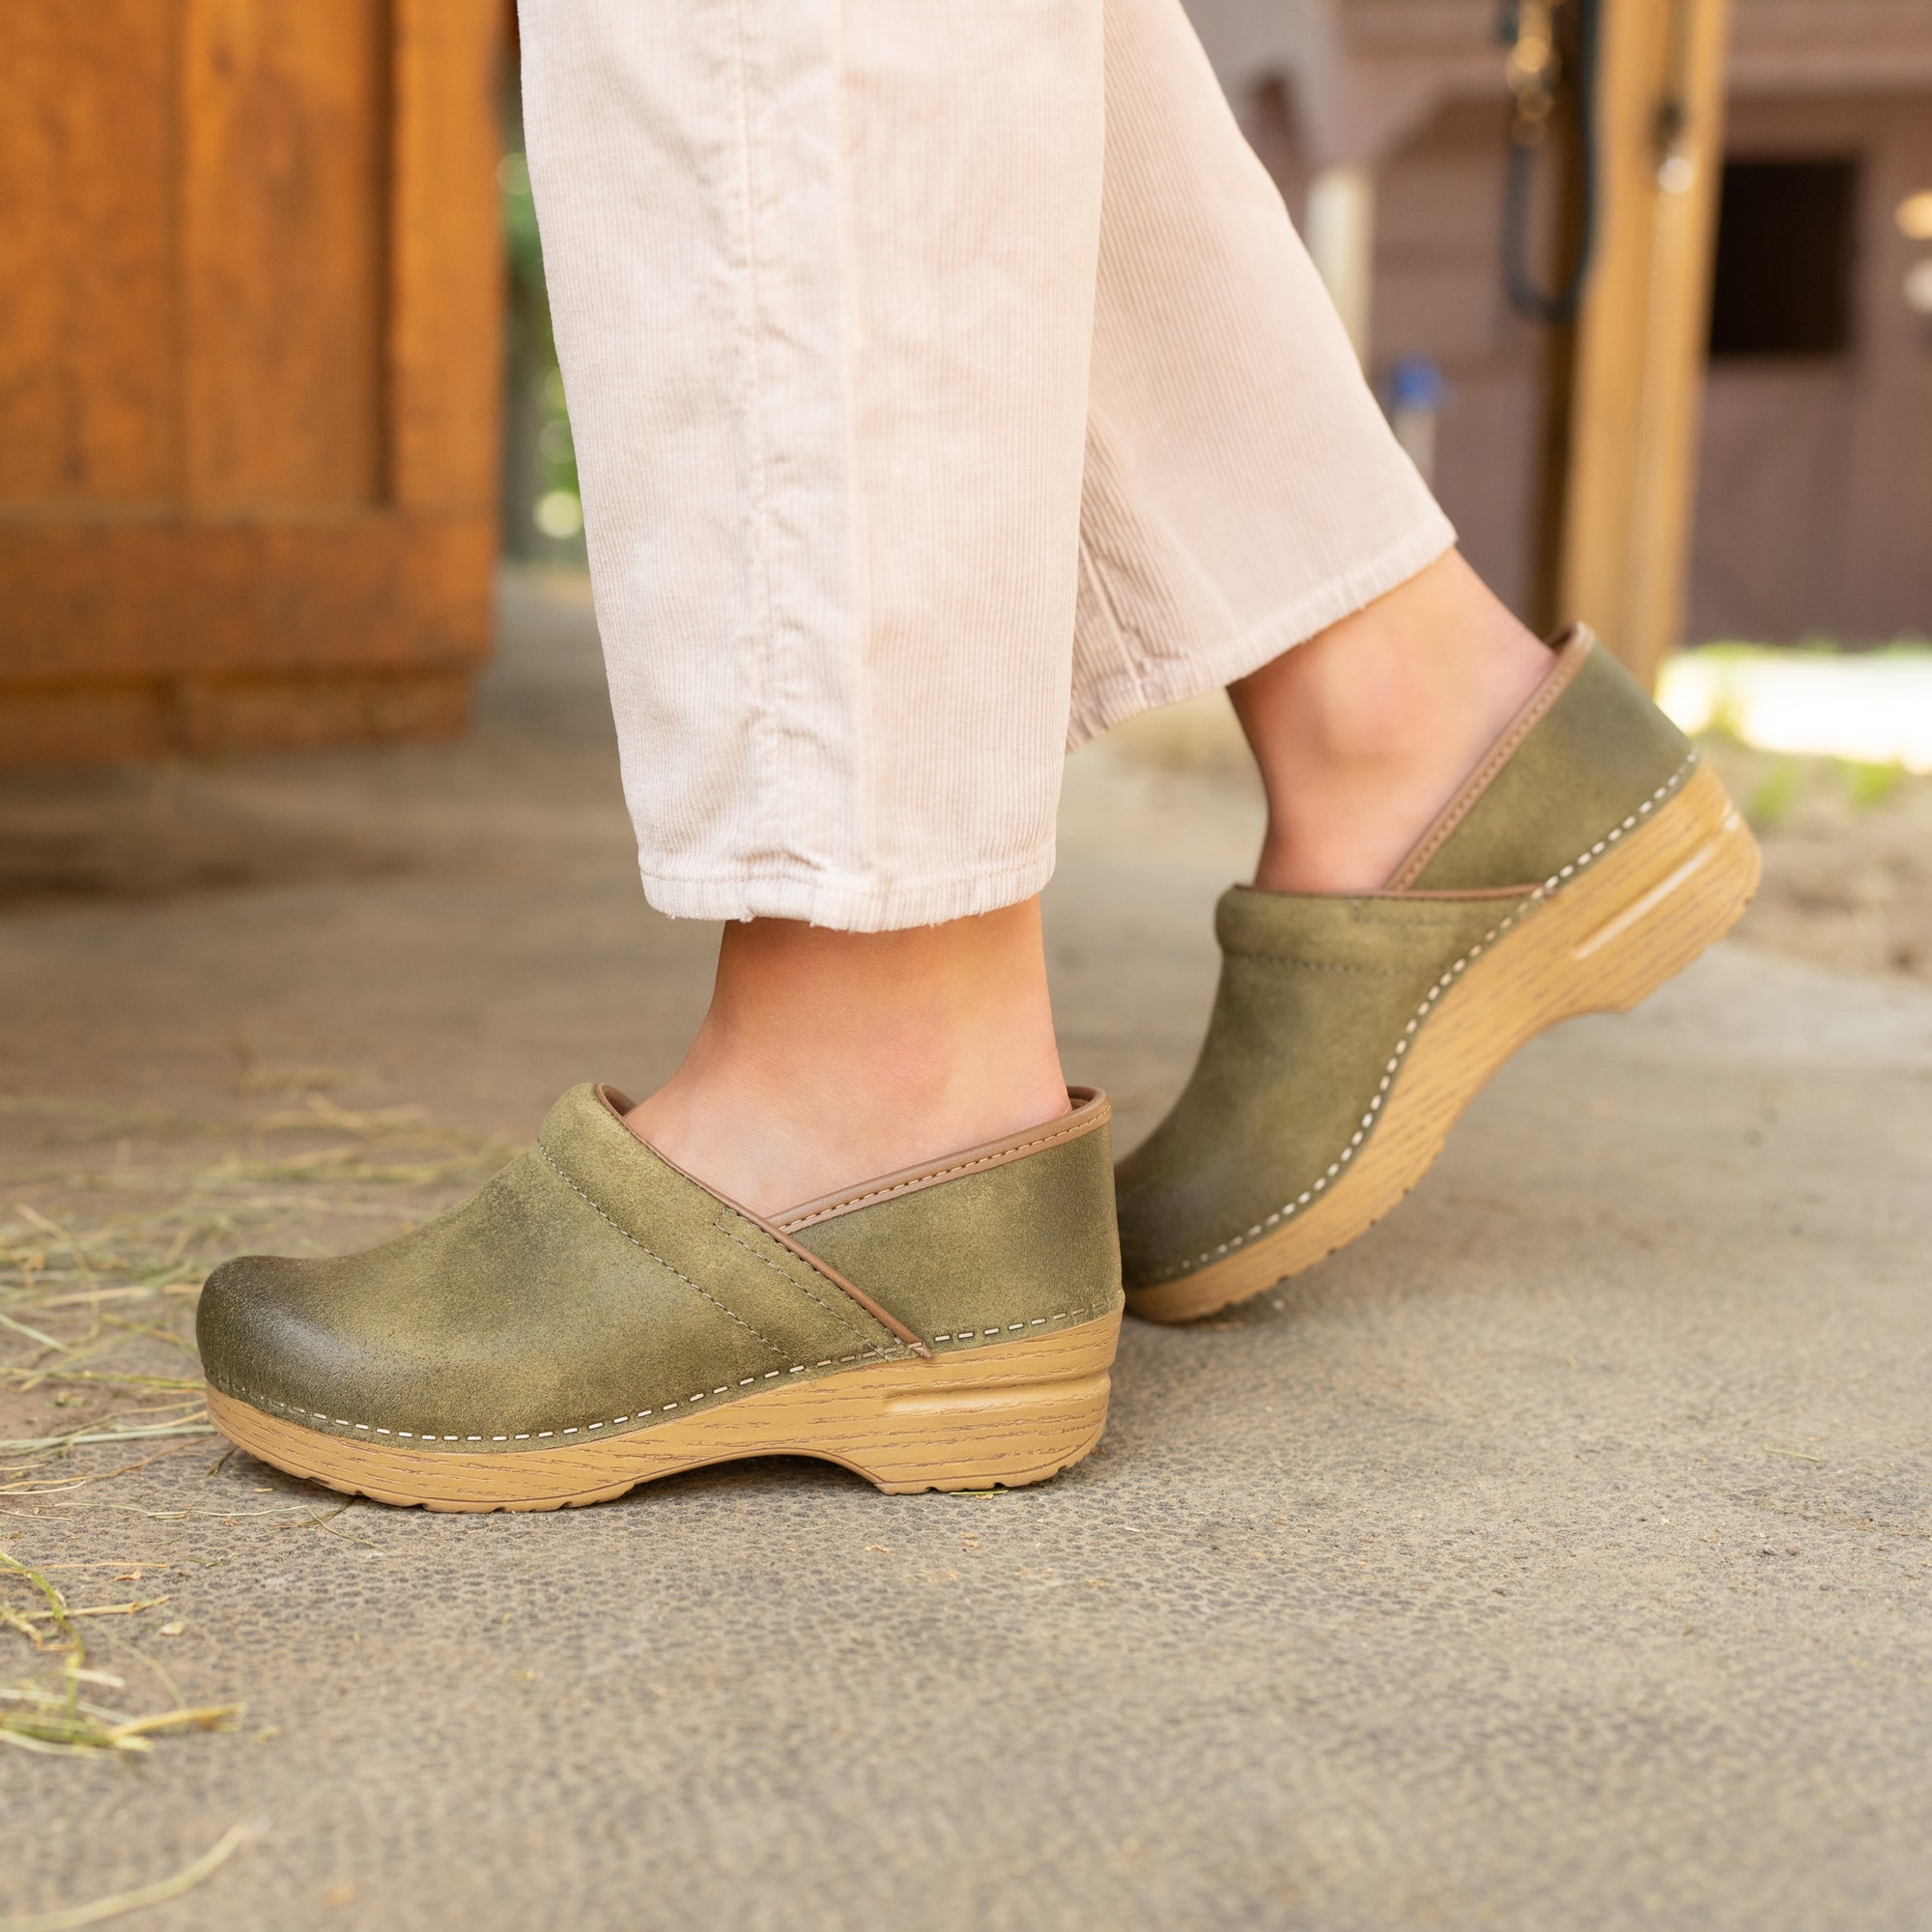 Green clogs from Dansko styled with tan pants.